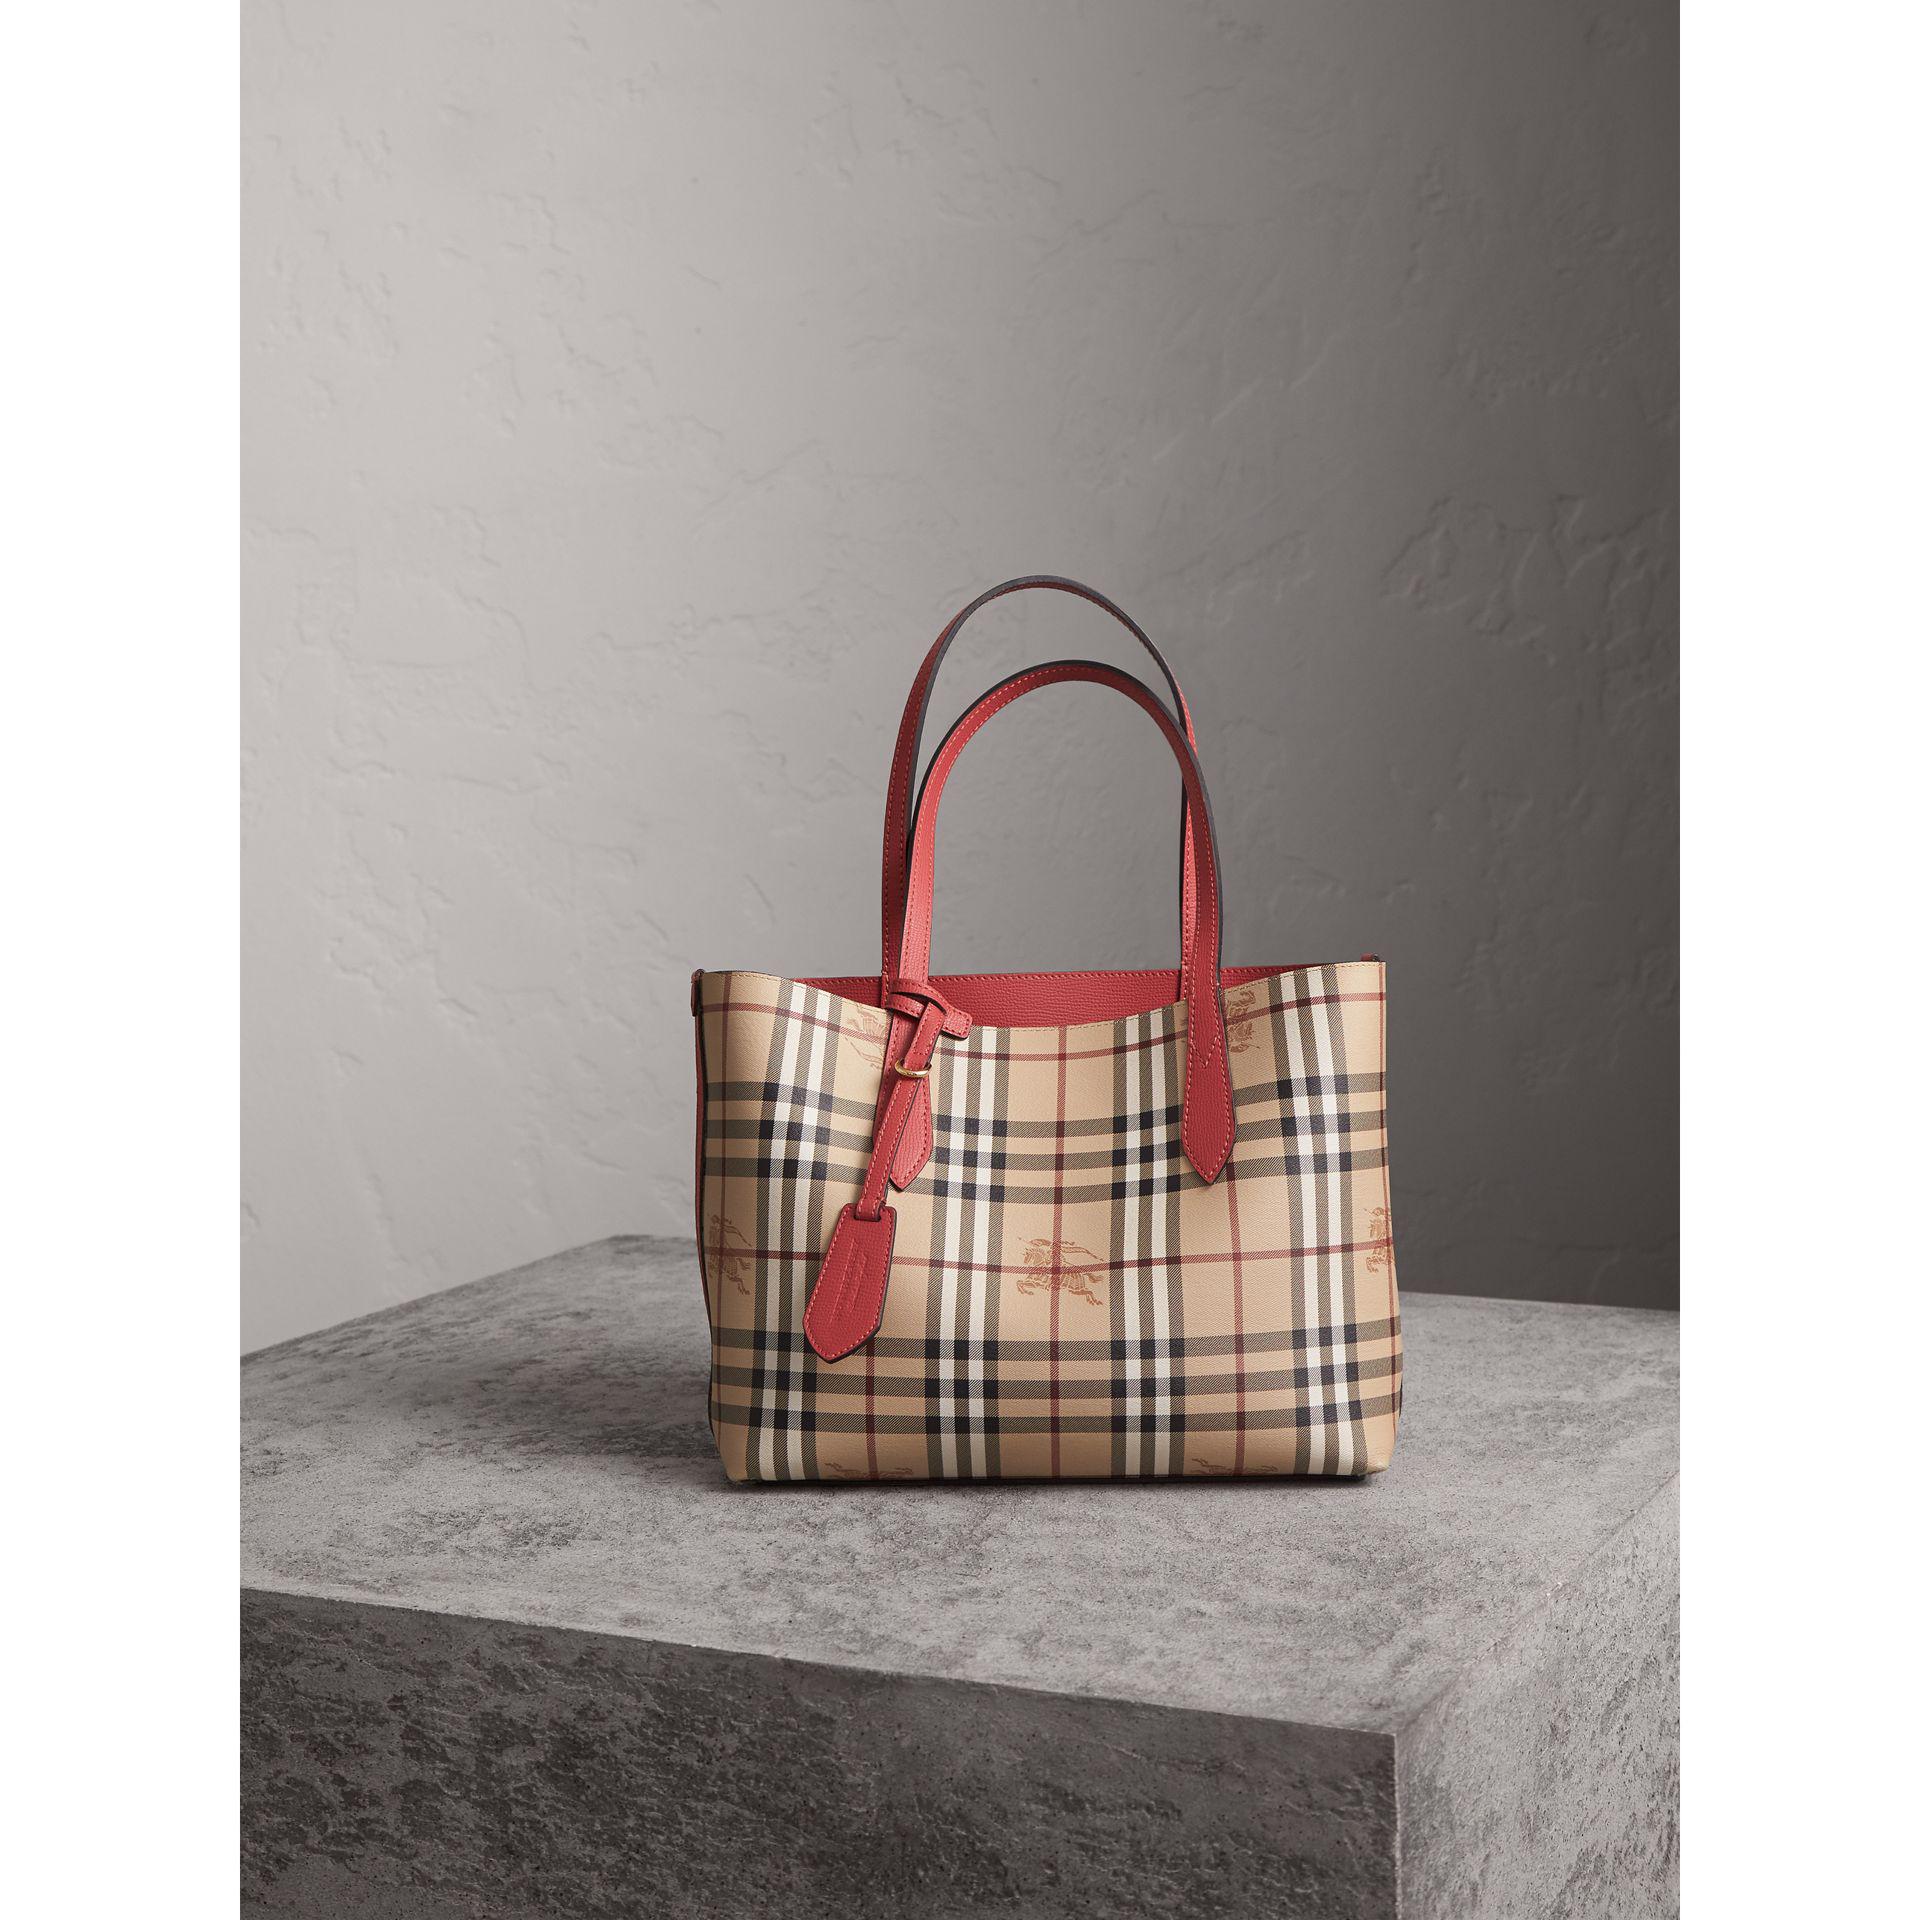 Totes bags Burberry - Haymarket check reversible tote - 4049585